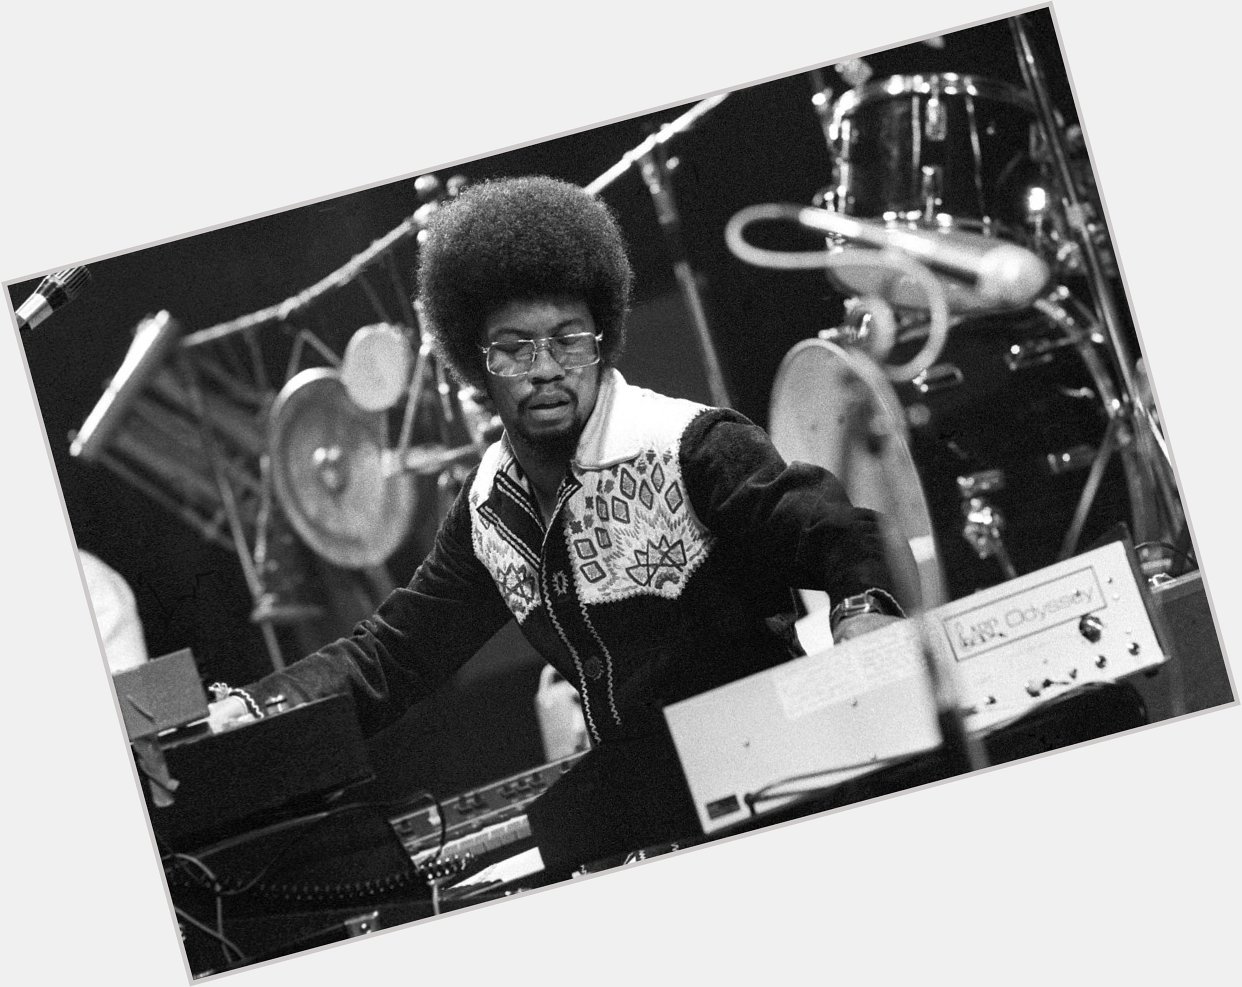 Happy Bday to one of my favorite musicians of ever Herbie Hancock. Always ahead of his time. 